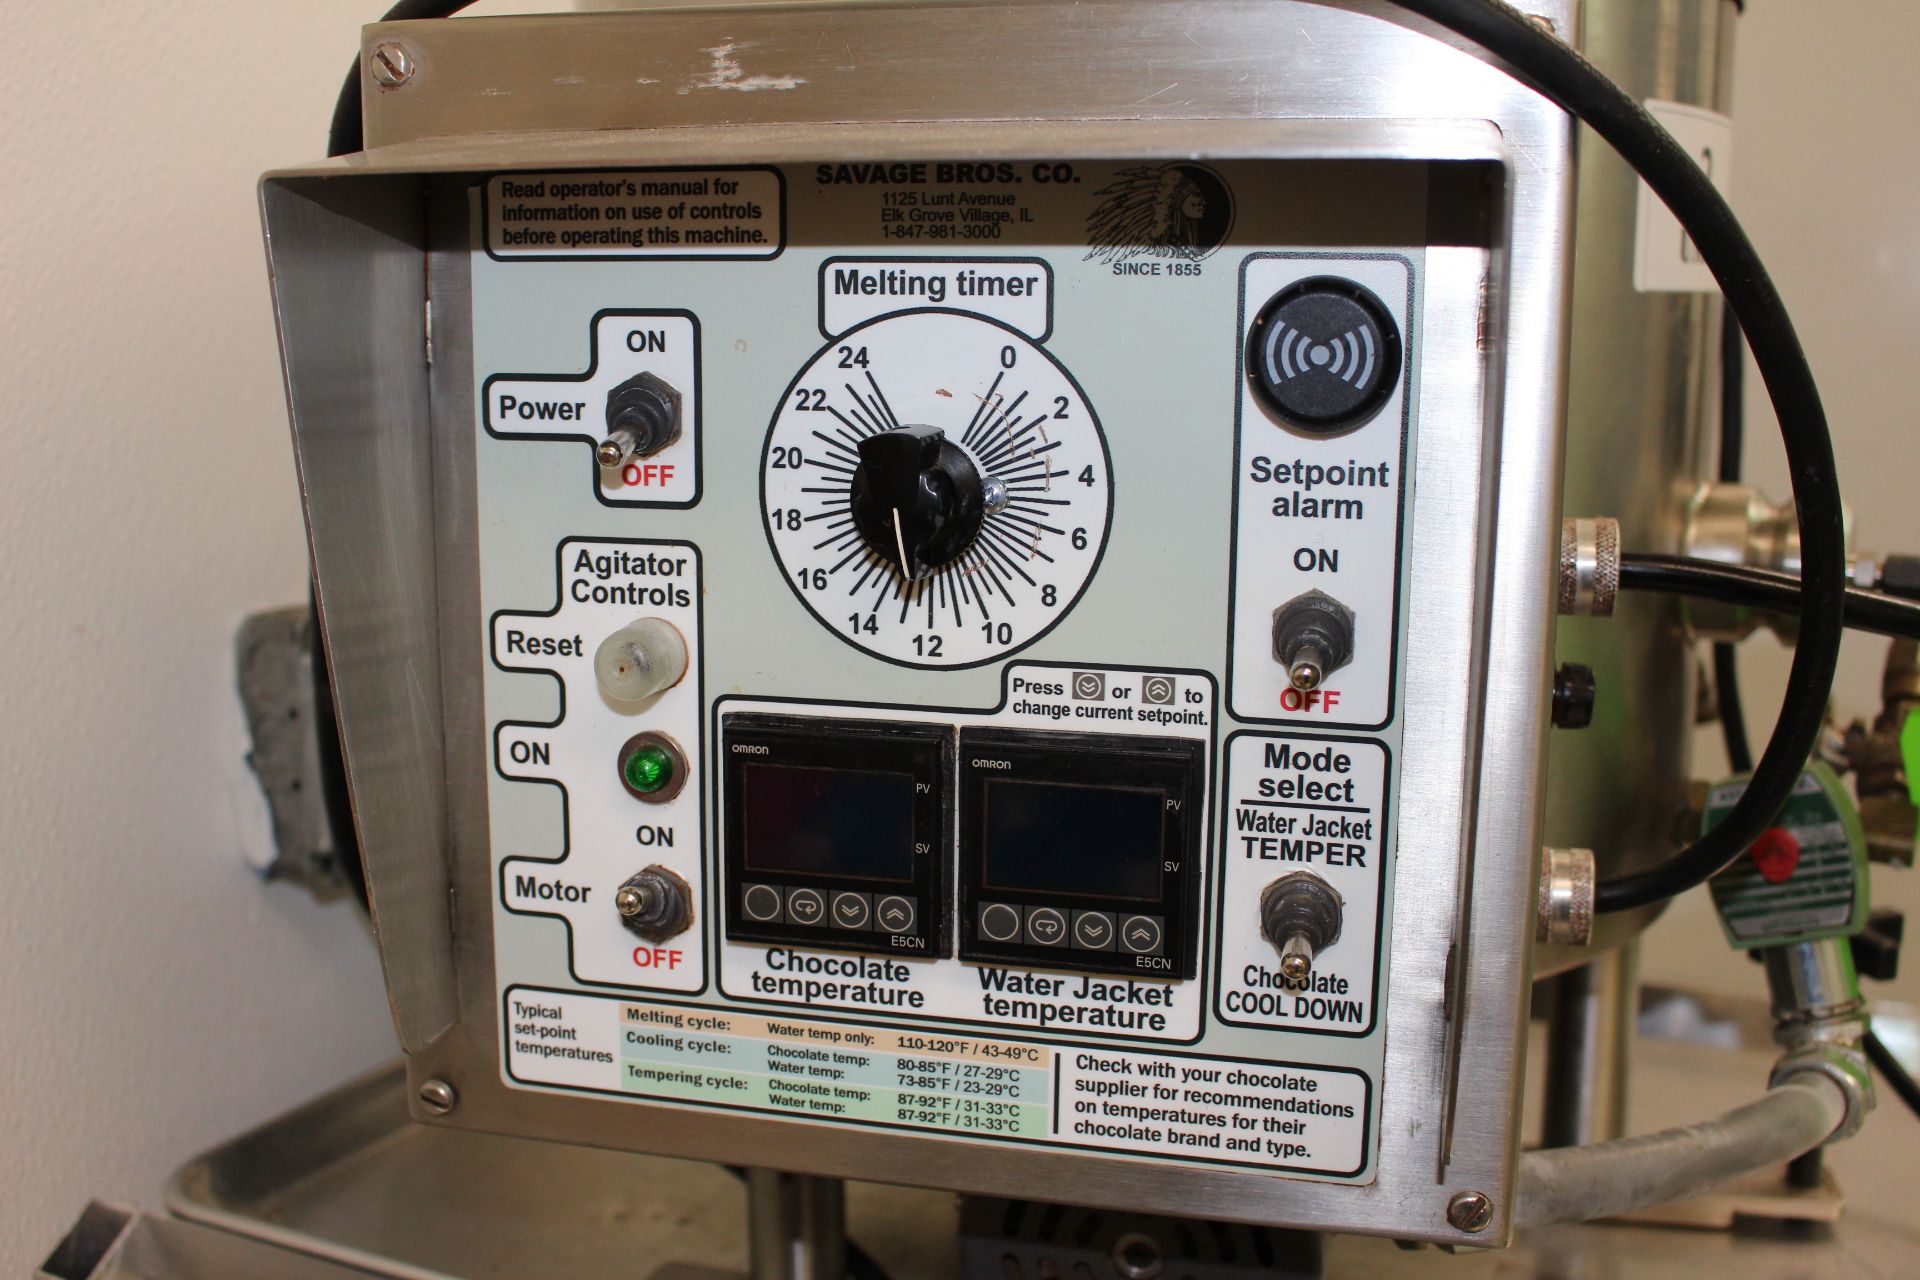 Savage model 0934-50 50-lb Stainless Steel Chocolate Melter melting timer, solenoid to control water - Image 4 of 5